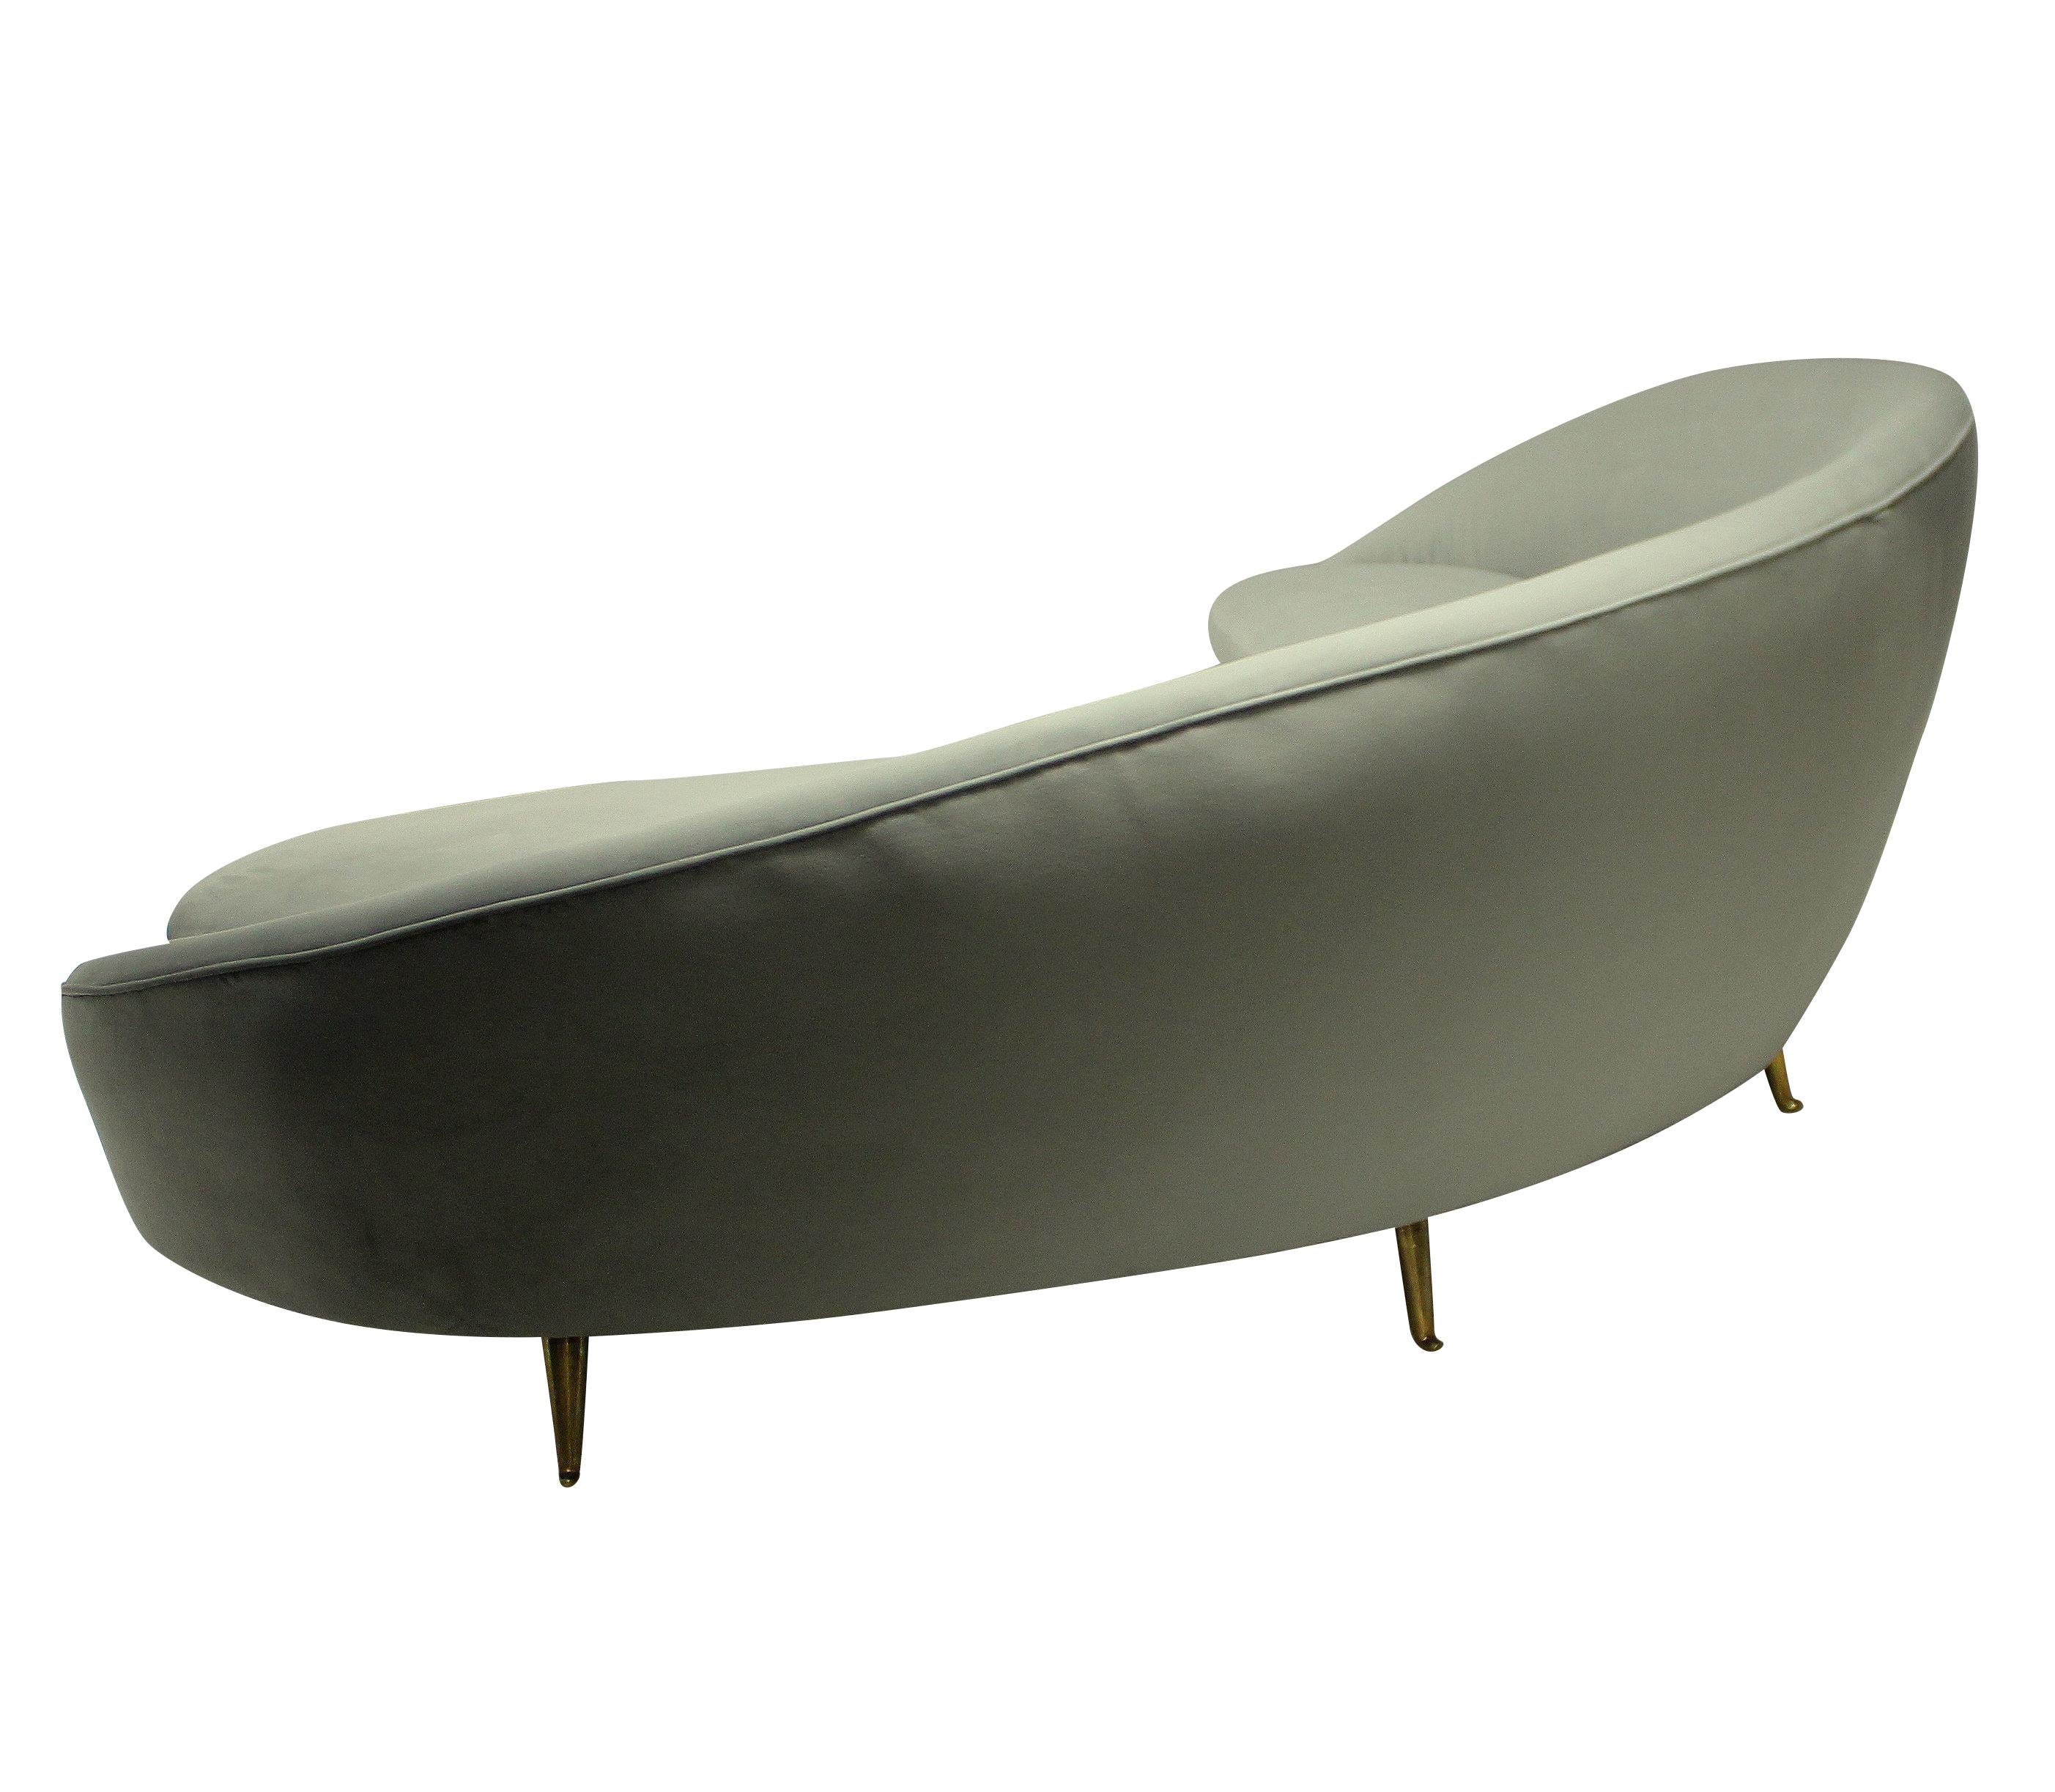 Mid-Century Modern Large Iconic Sculptural Curved Sofa in the Style of Ico Parisi